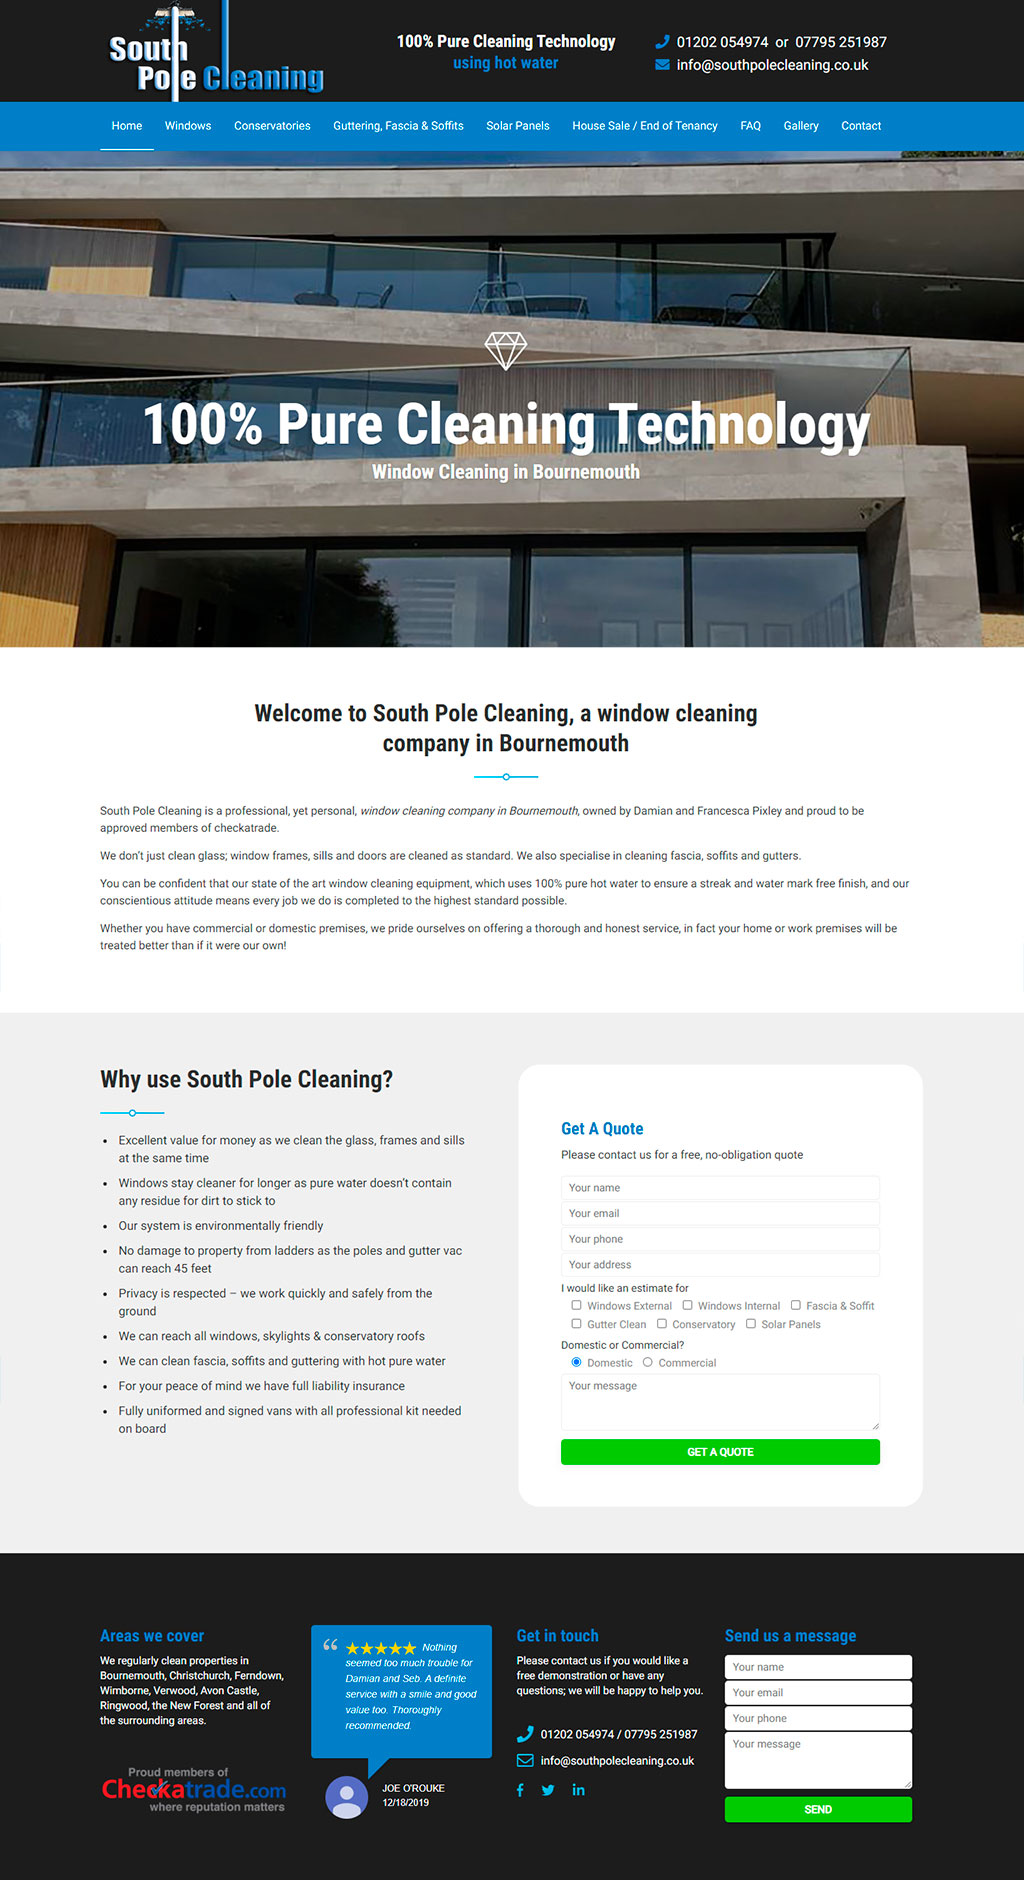 South Pole Cleaning website design